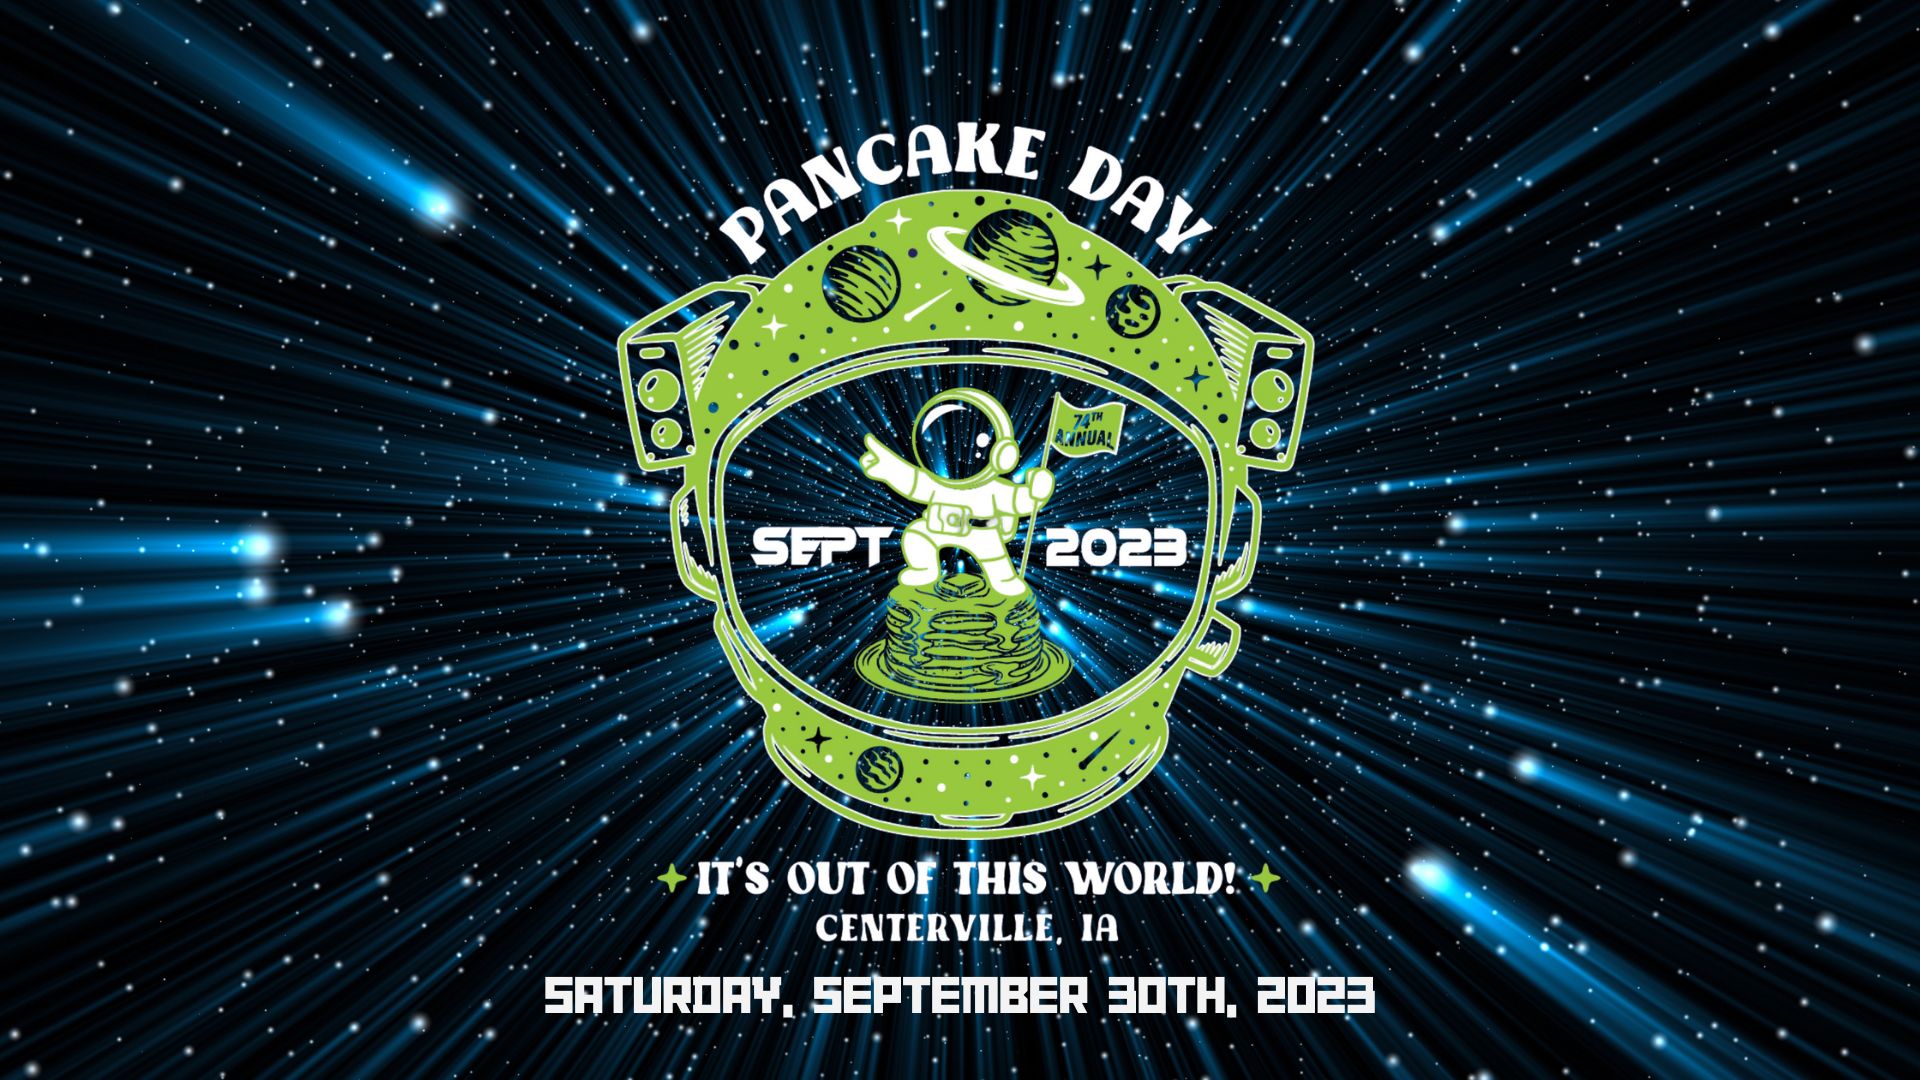 74th Annual Pancake Day theme reveal September 30th